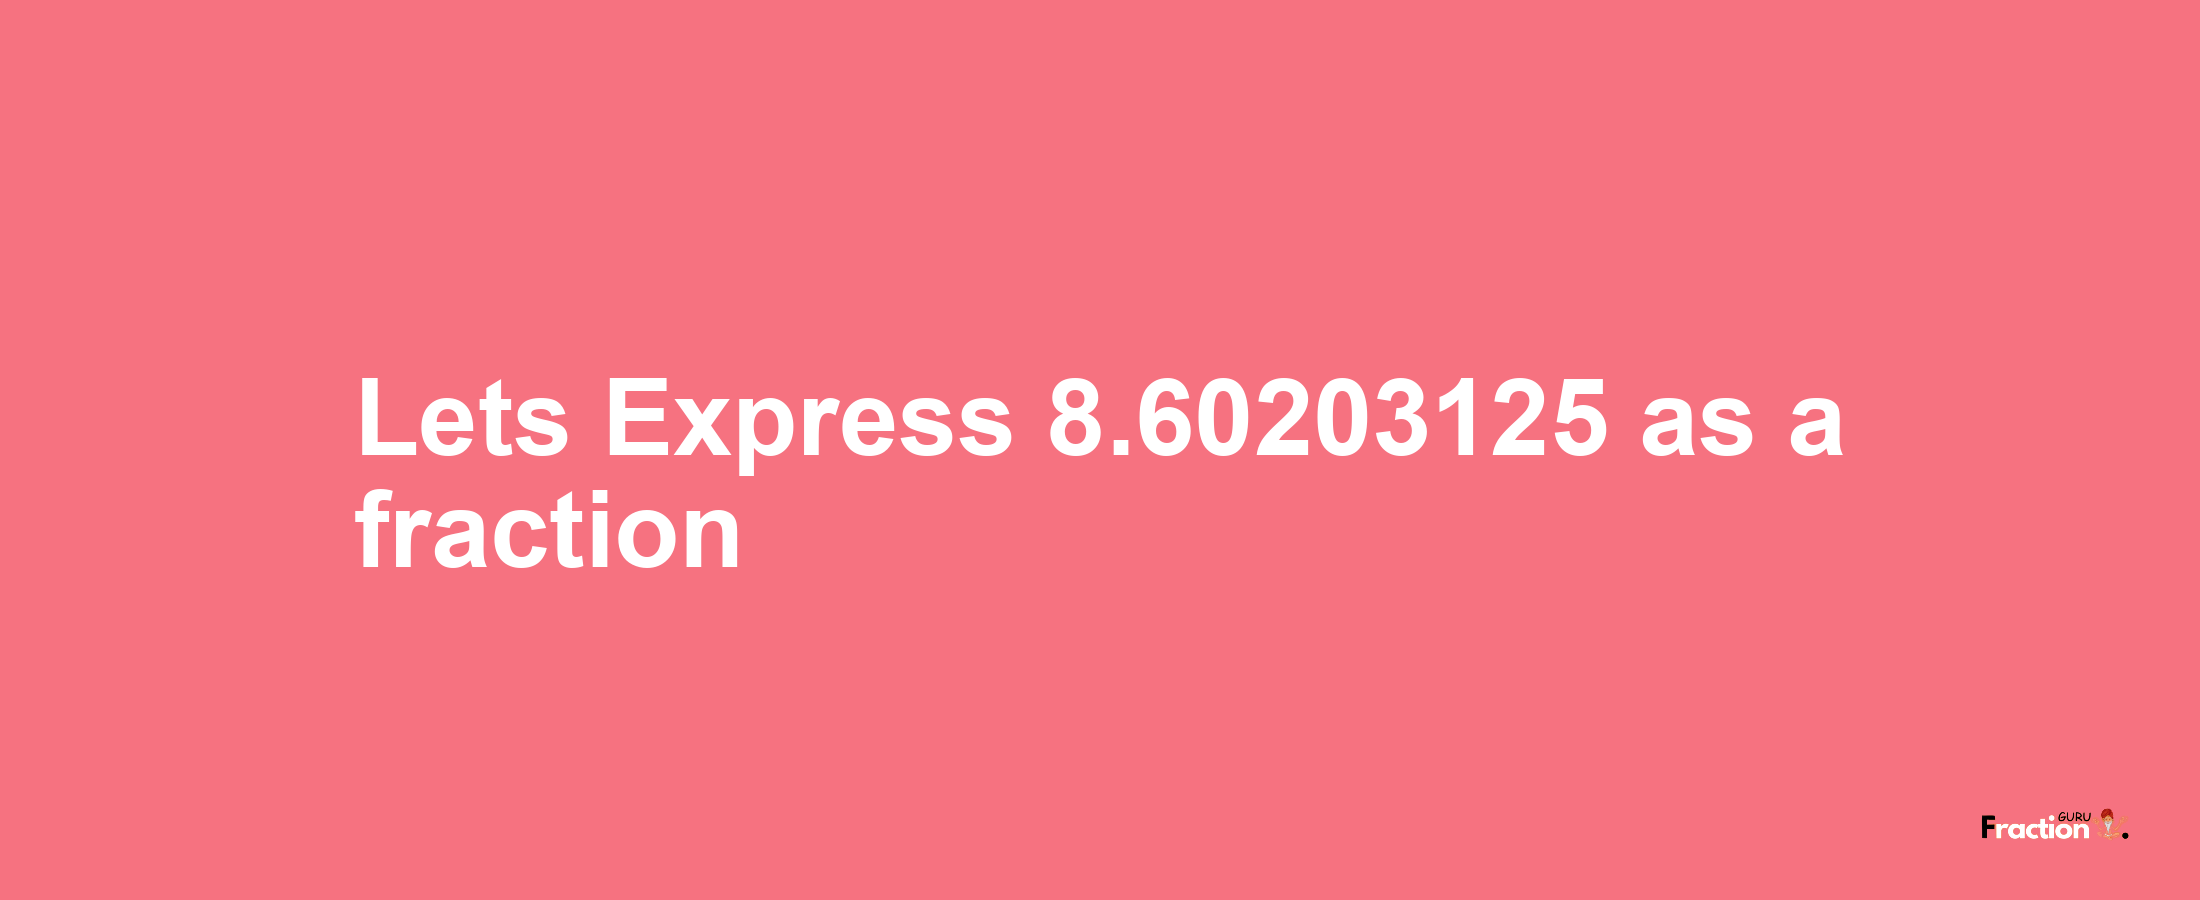 Lets Express 8.60203125 as afraction